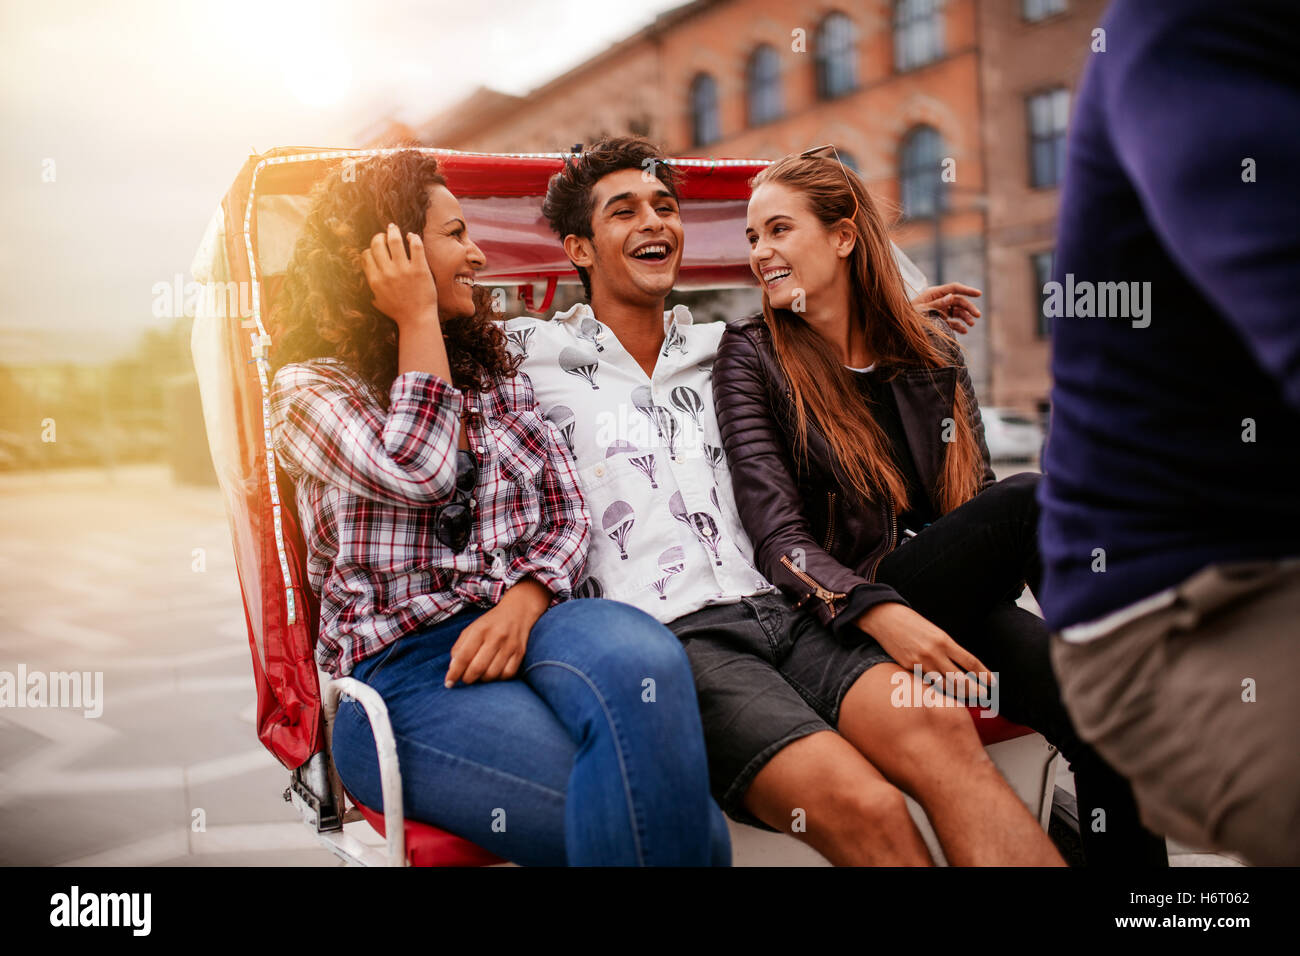 Three young friends enjoying tricycle ride in the city. Teenagers riding on tricycle on road. Stock Photo